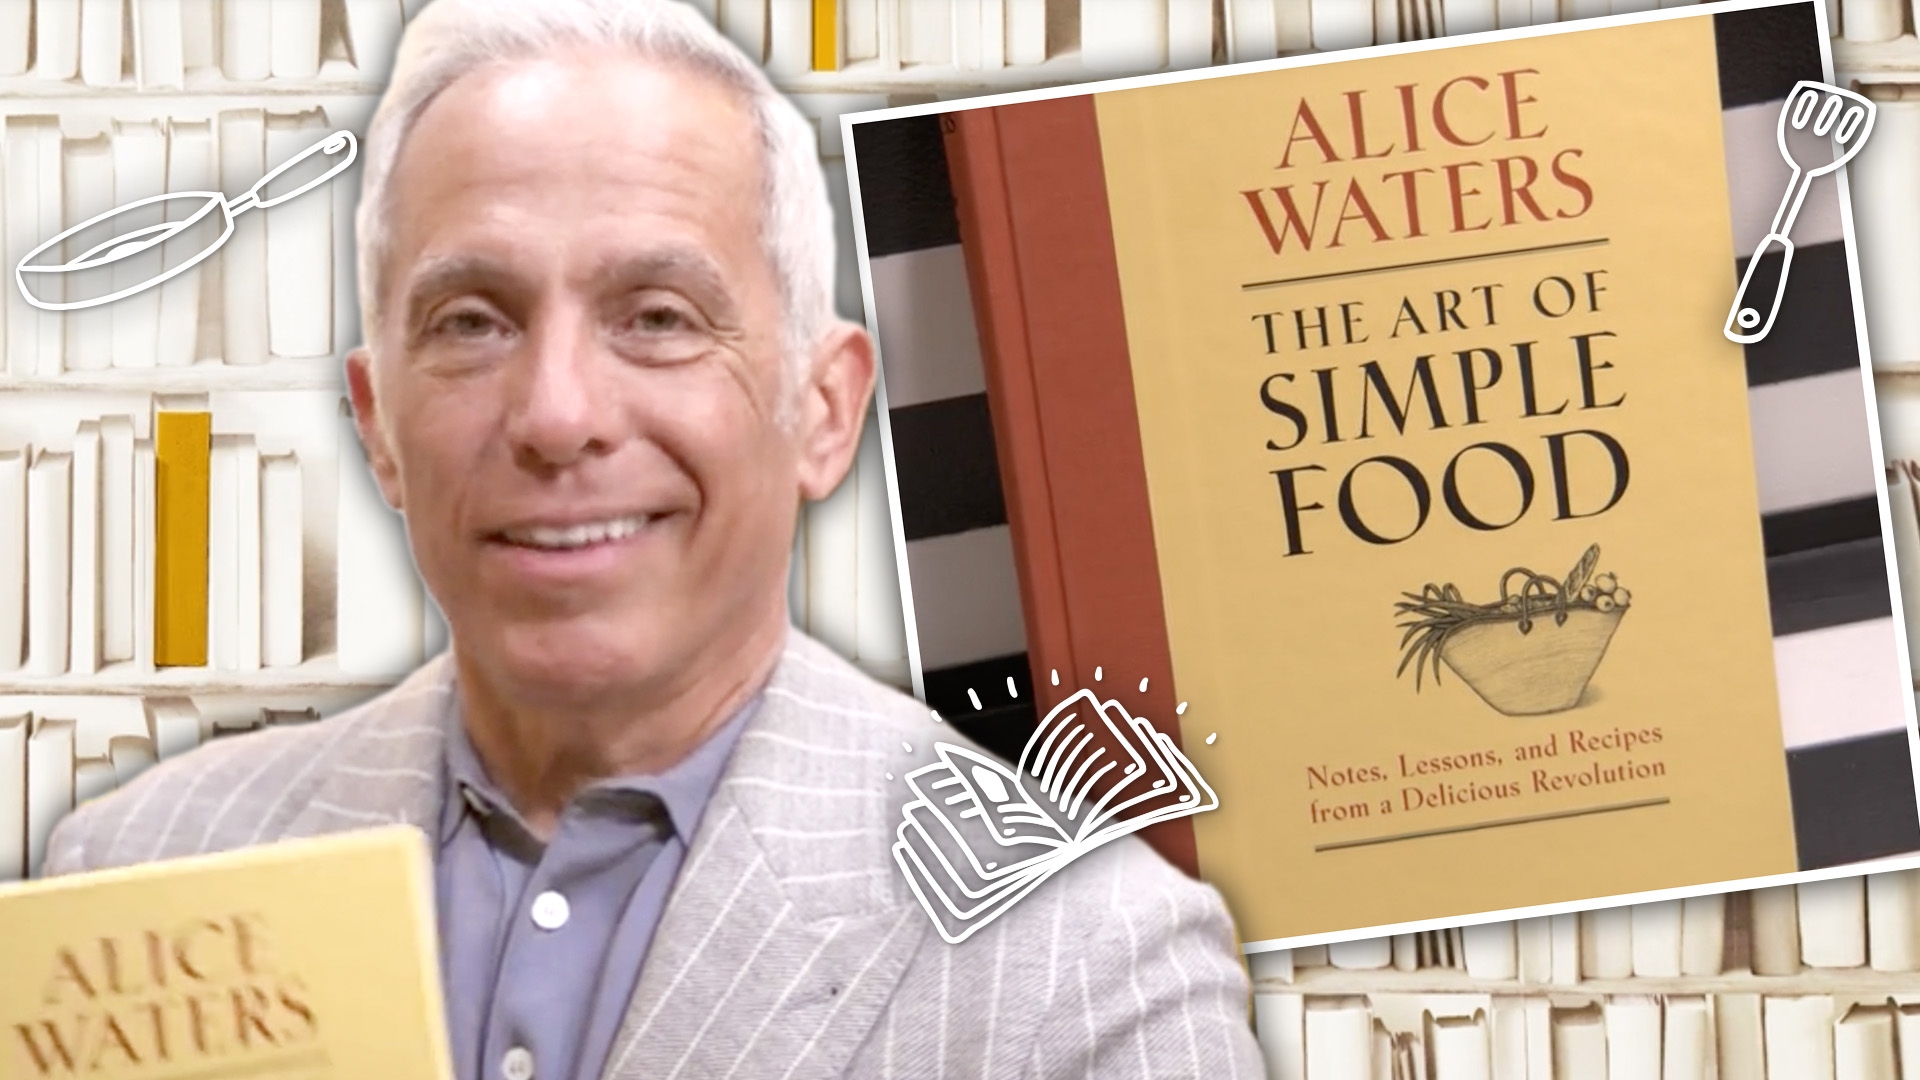 Geoffrey Zakarian - New for your library, I wrote this cookbook